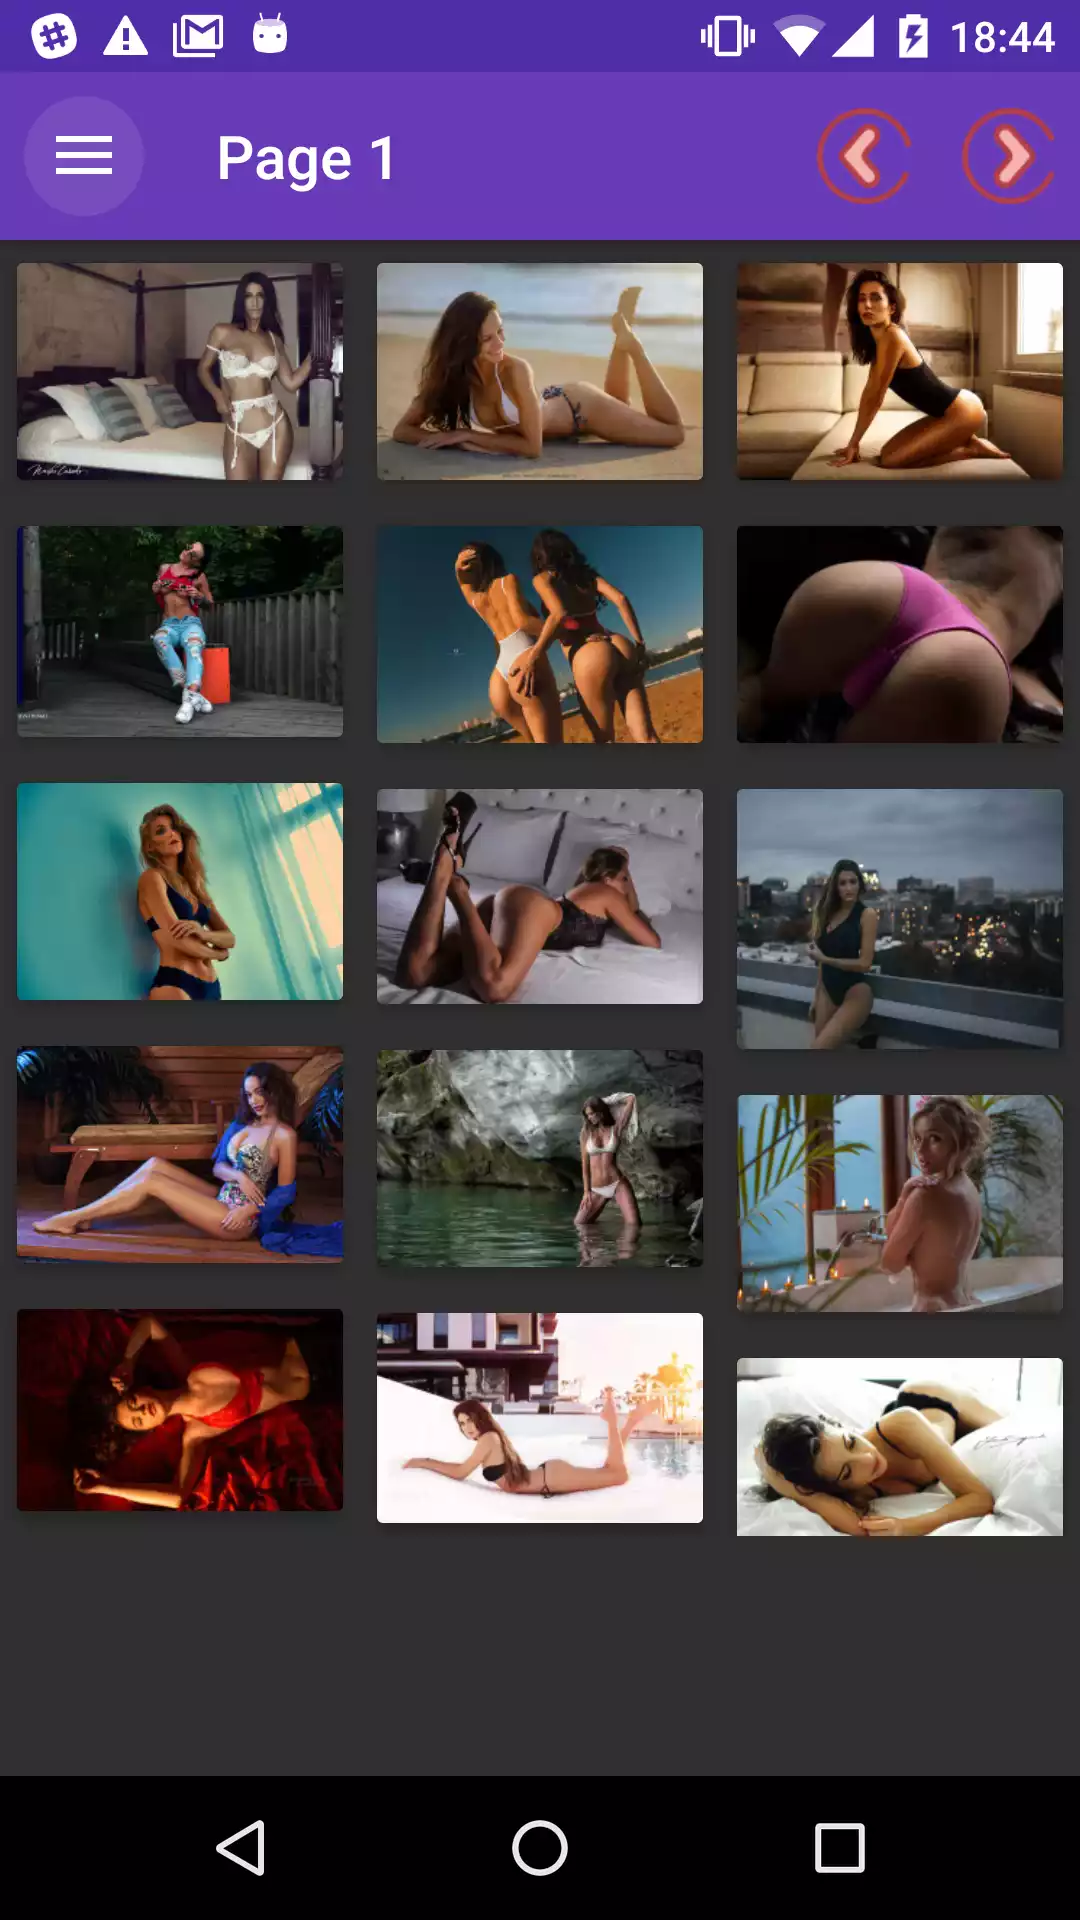 Tanned Wallpapers futanari,bisexpics,backgrounds,nhentai,perfectshemales,watching,galleries,hentai,picx,apps,jagger,android,pic,photos,app,wallpapers,josie,porn,download,cuckhold,new,sexy,for